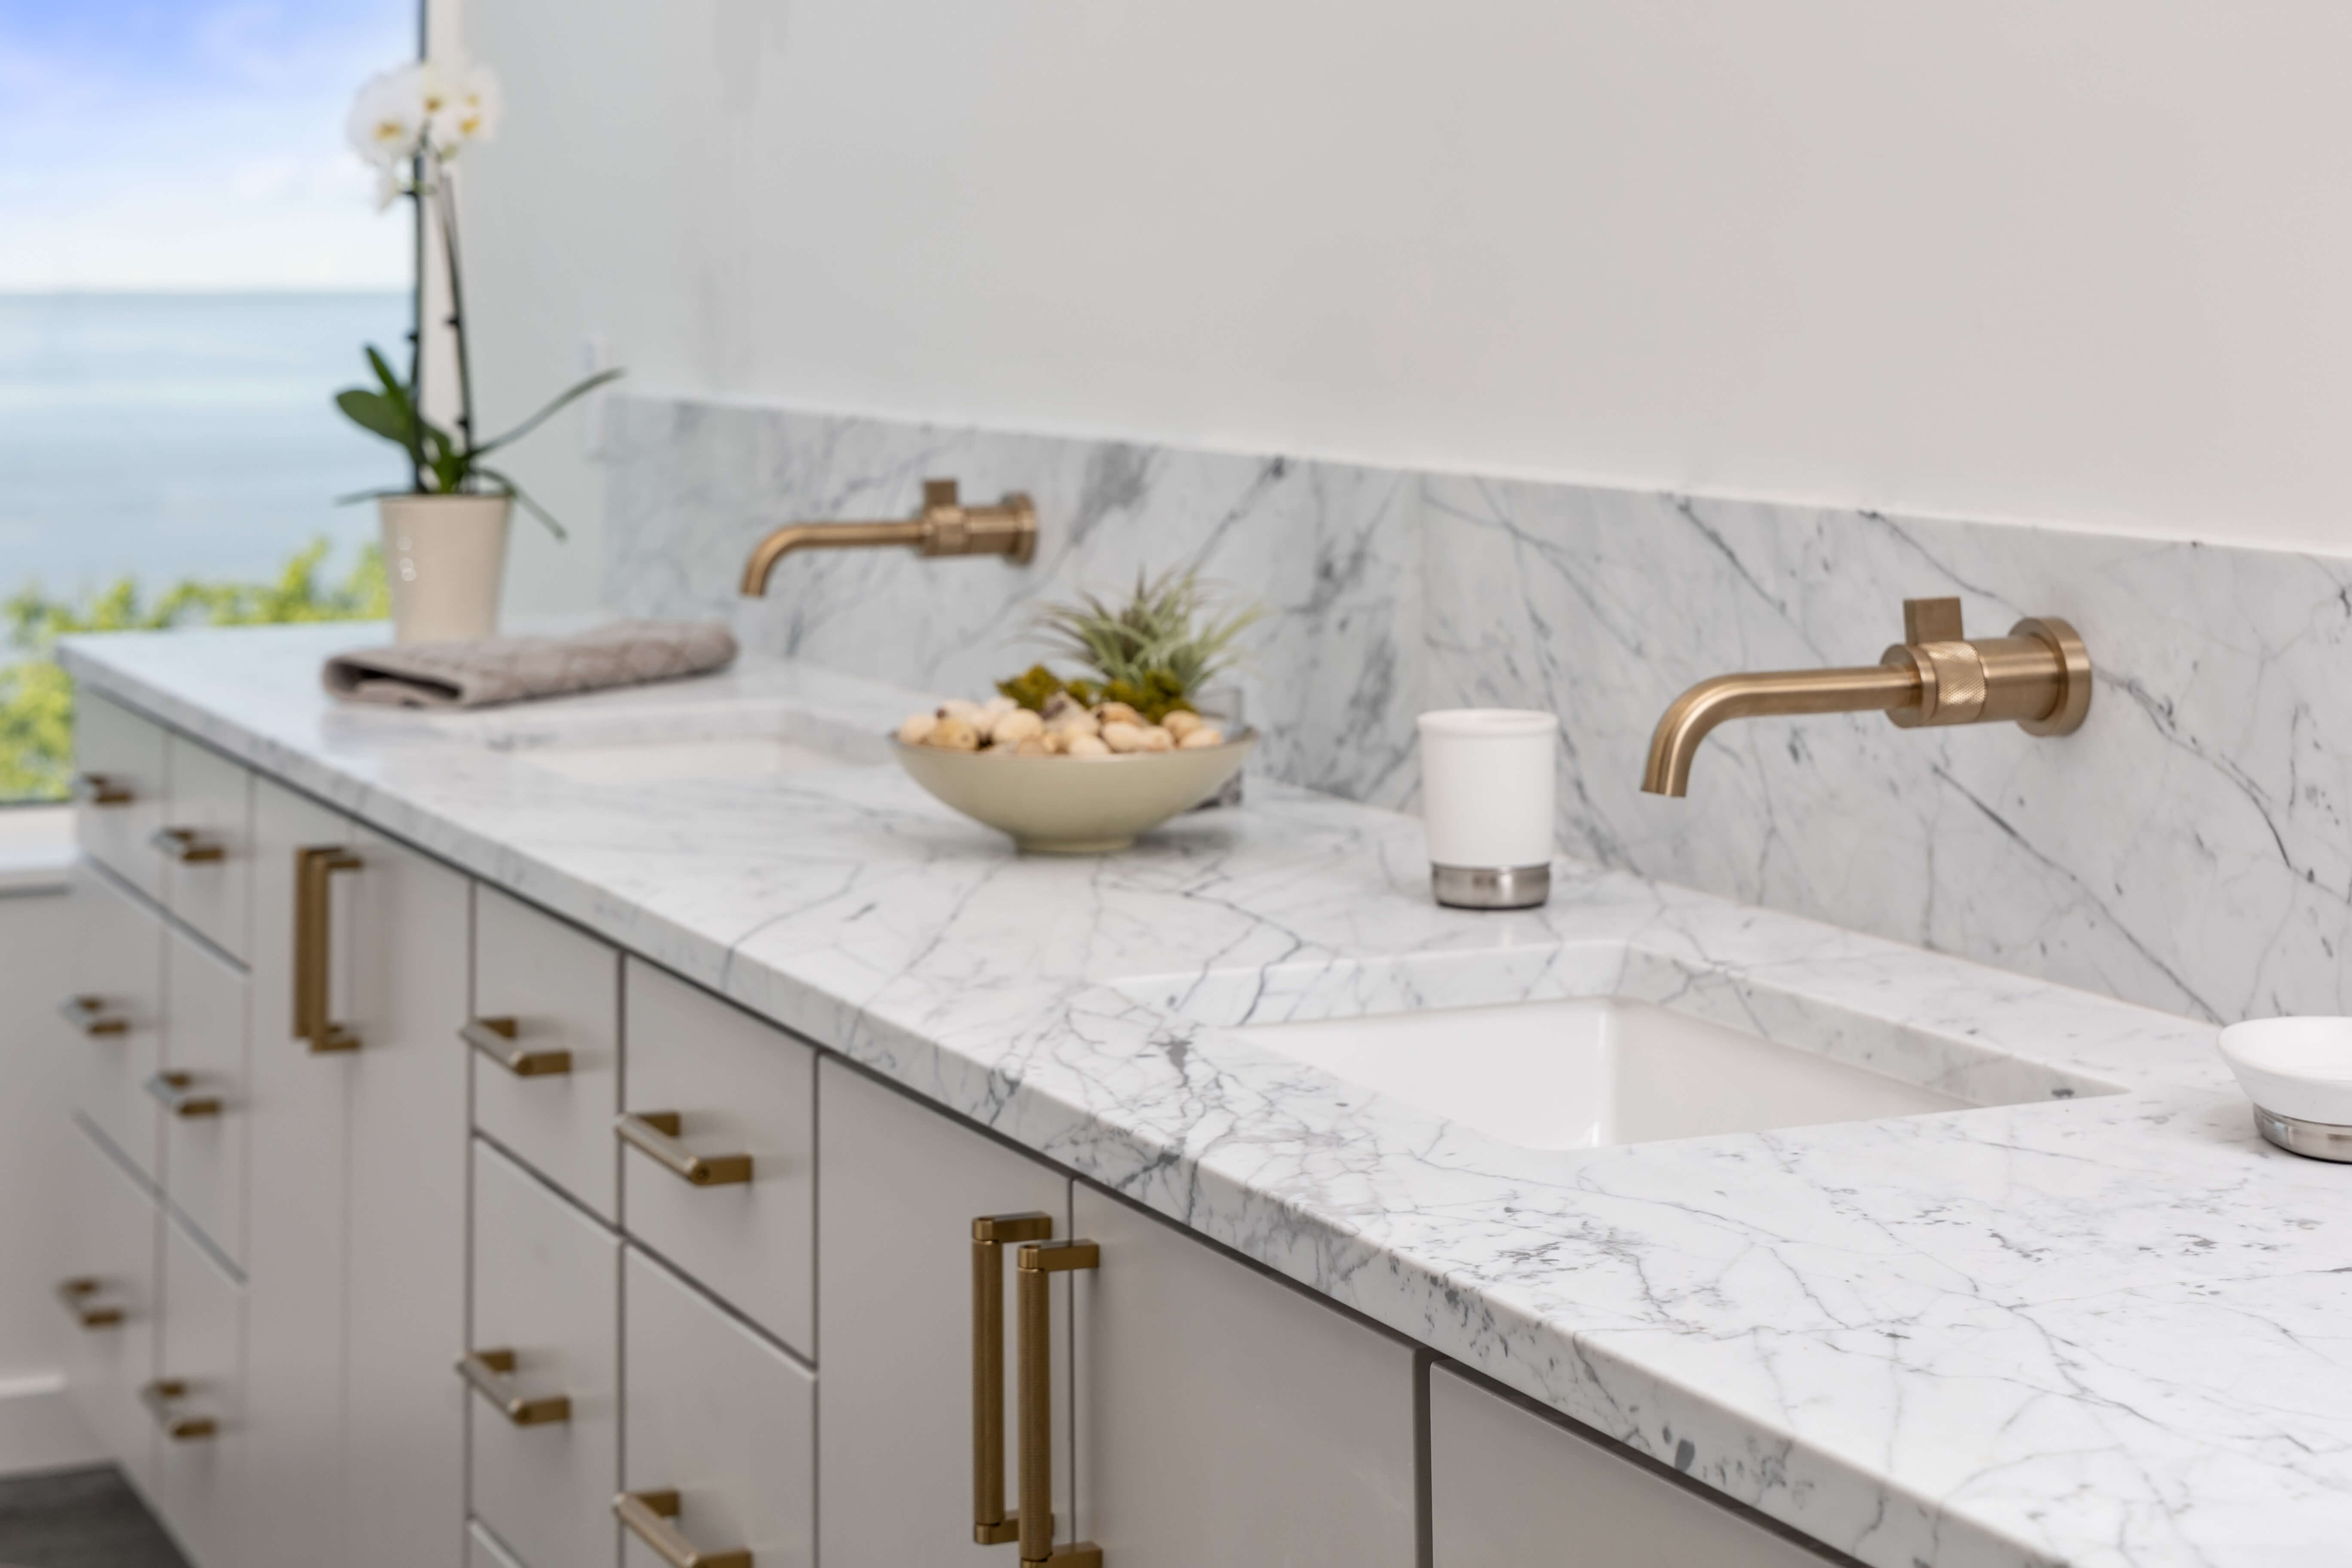 A soft, light gray bathroom vanity with slab cabinet doors, dual sinks, and brushed brass hardware accents.